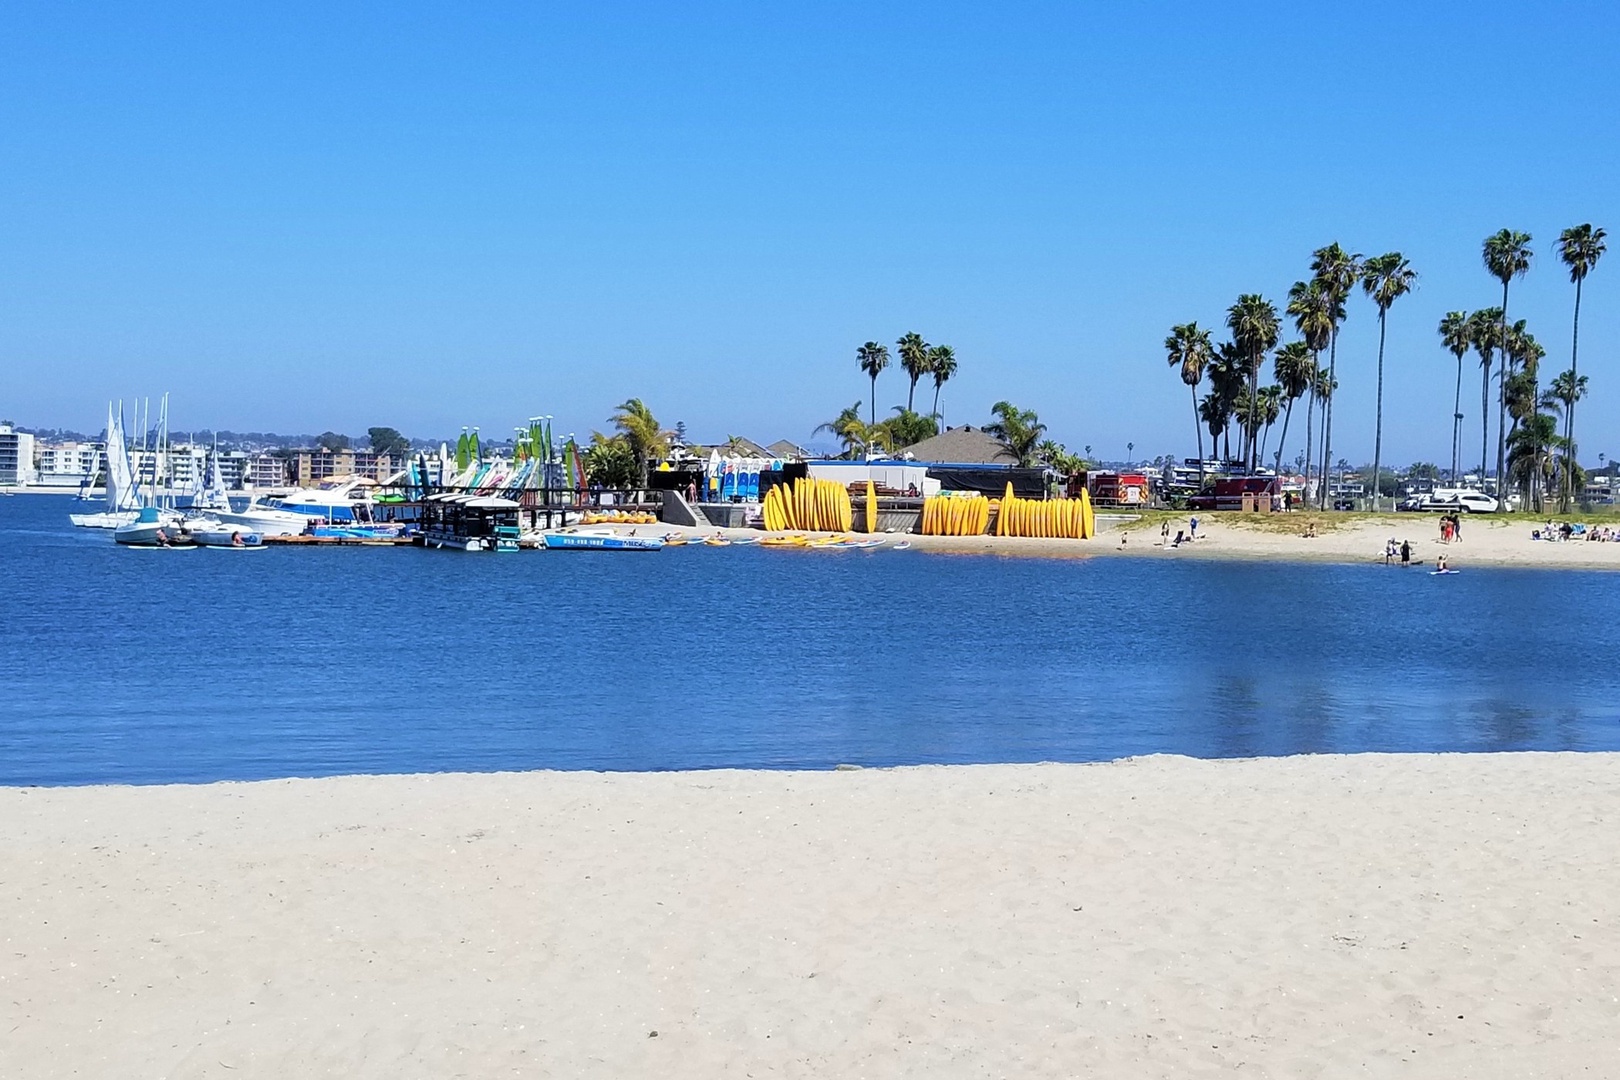 Mission Bay Aquatic Center is nearby